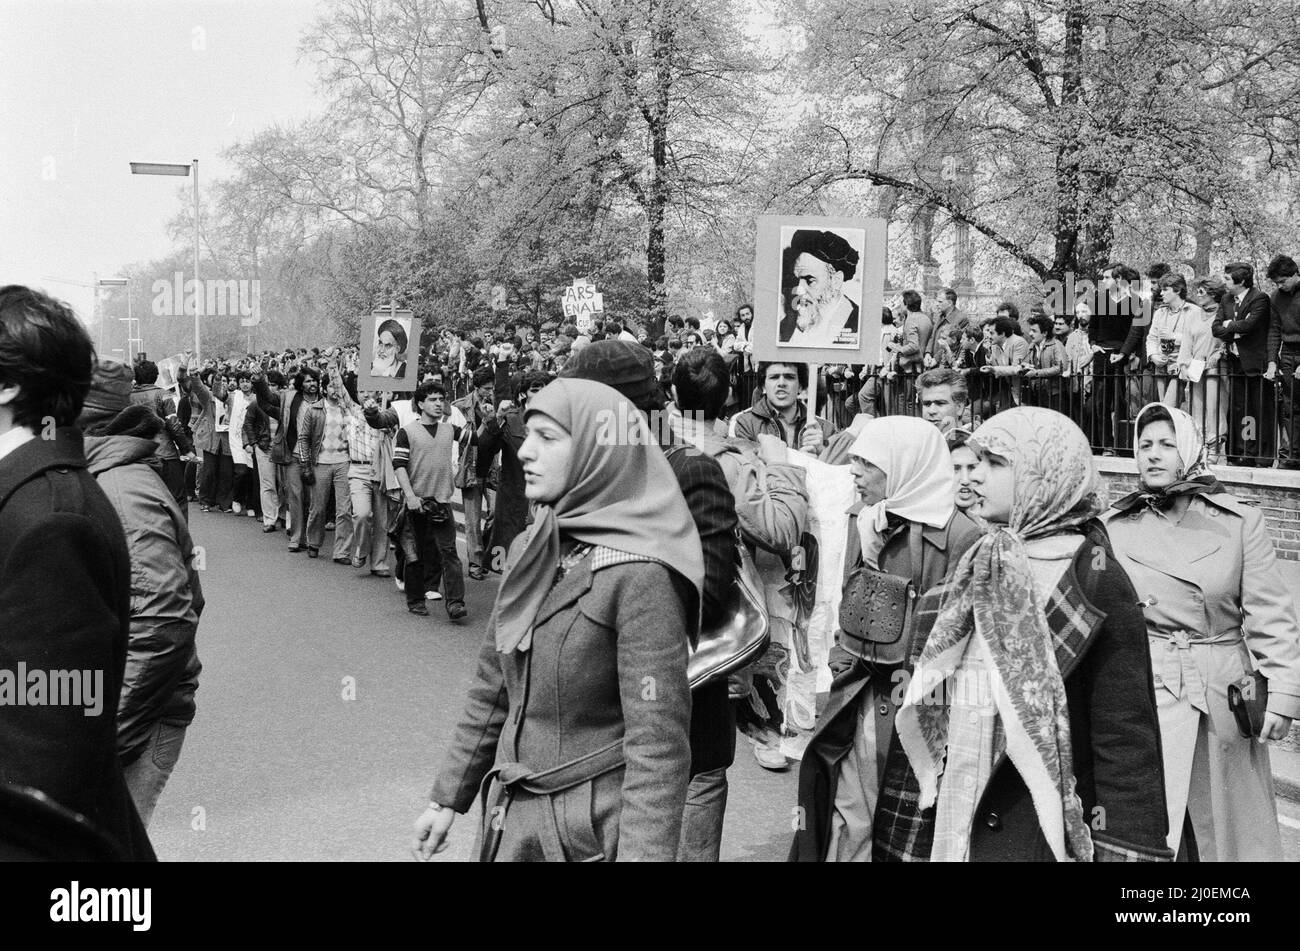 Second day of the Iranian Embassy Siege in London where six gunmen of the Iranian extremist group 'Democratic Revolutionary Movement for the Liberation of Arabistan' stormed the building, taking 26 hostages before the SAS retook the embassy and freed the hostages. Supporters of the Ayatollah Khomeini marching near the embassy.  1st May 1980. Stock Photo